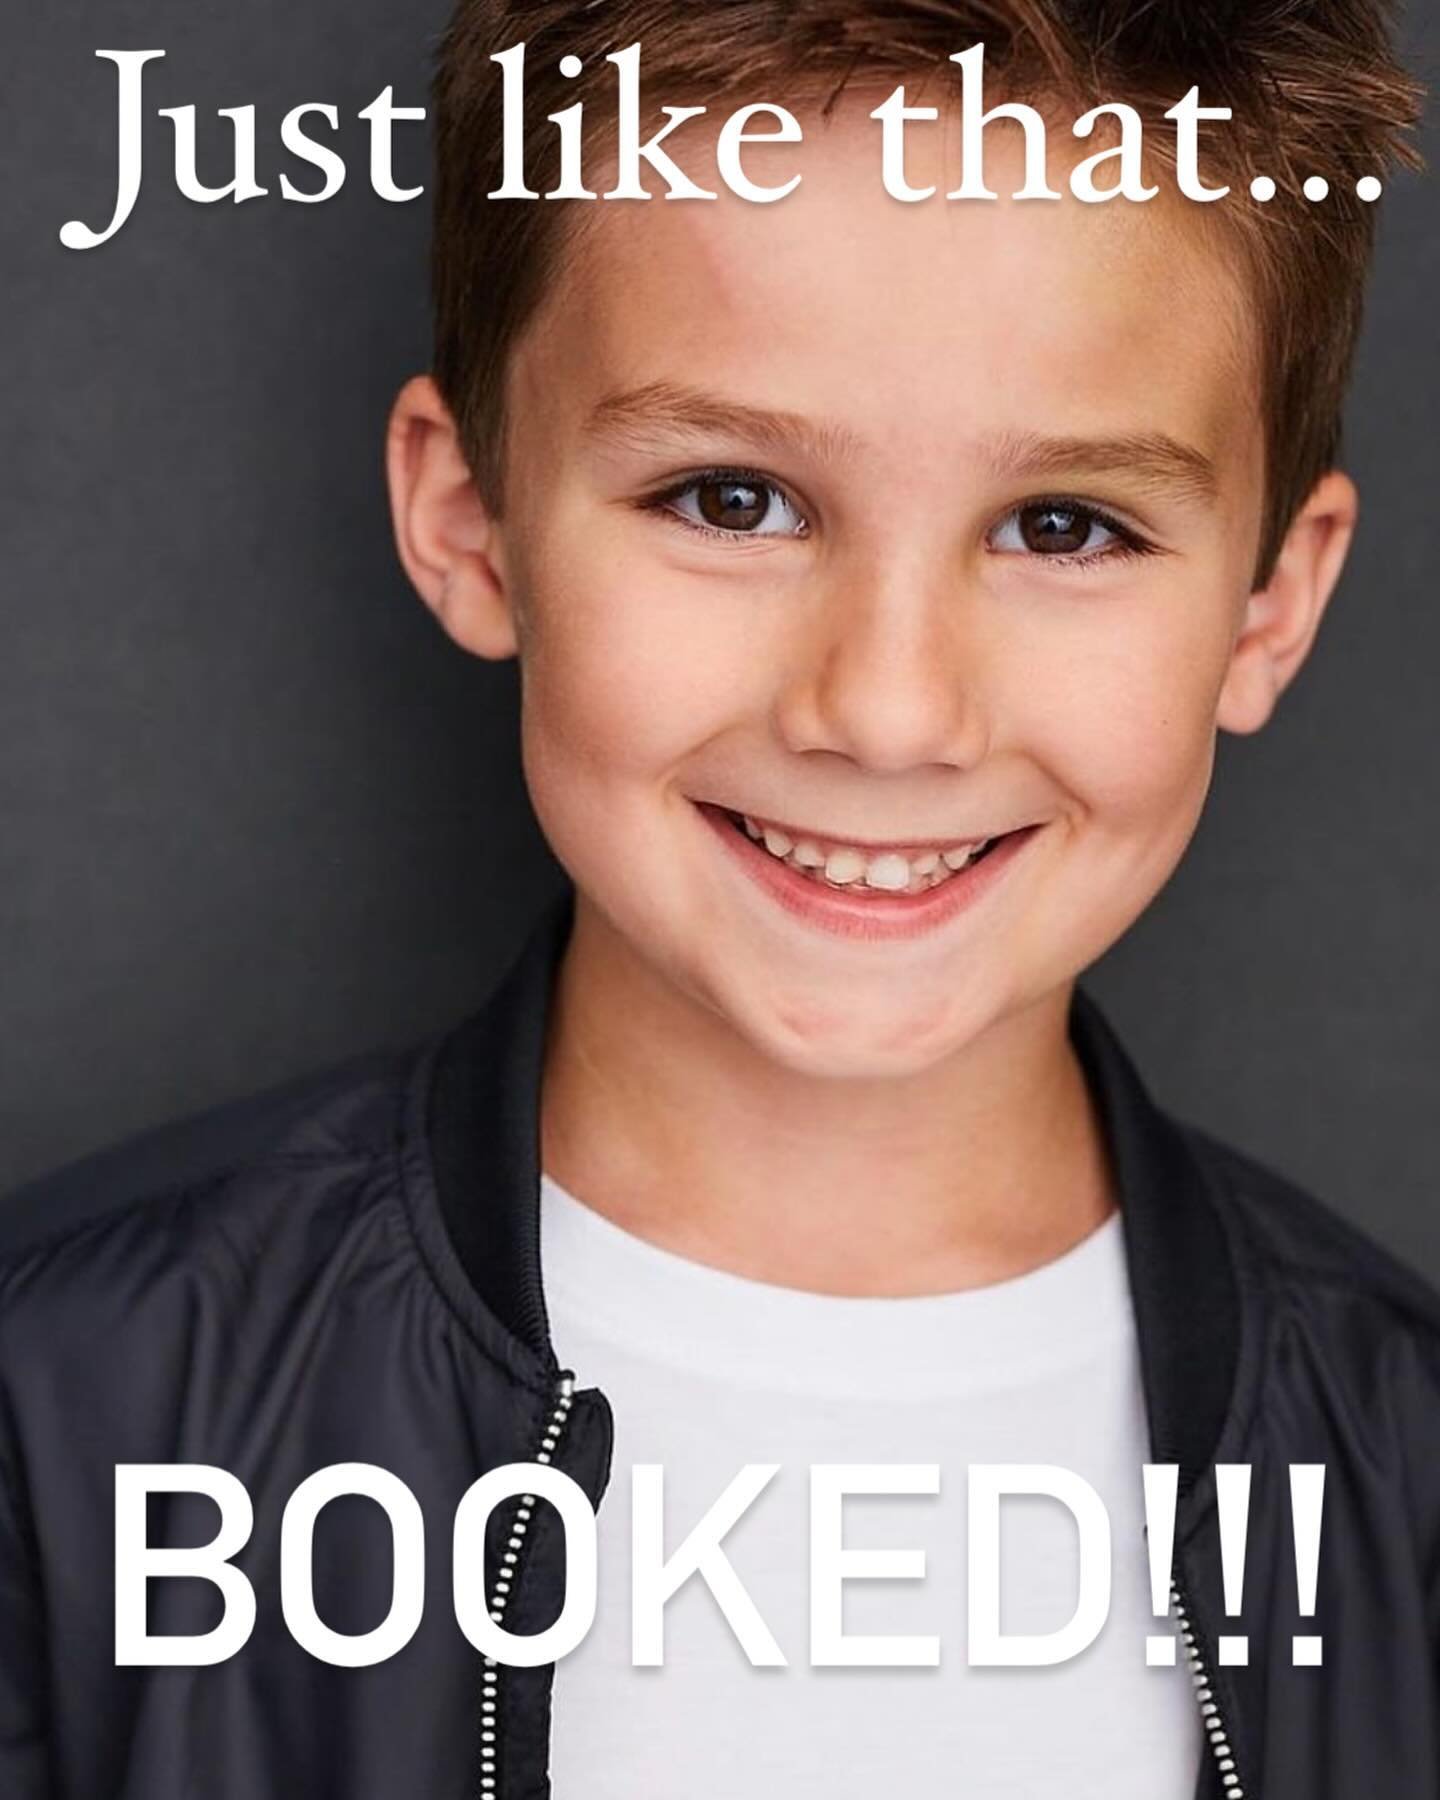 The smile of a kid who has had two bookings in one week!! Congrats @lynden_miles for his lead in a short film booking. It's just the beginning for this guy! 

#bookedbookers #bookedfamily #bookedbymichelle #proudcoach